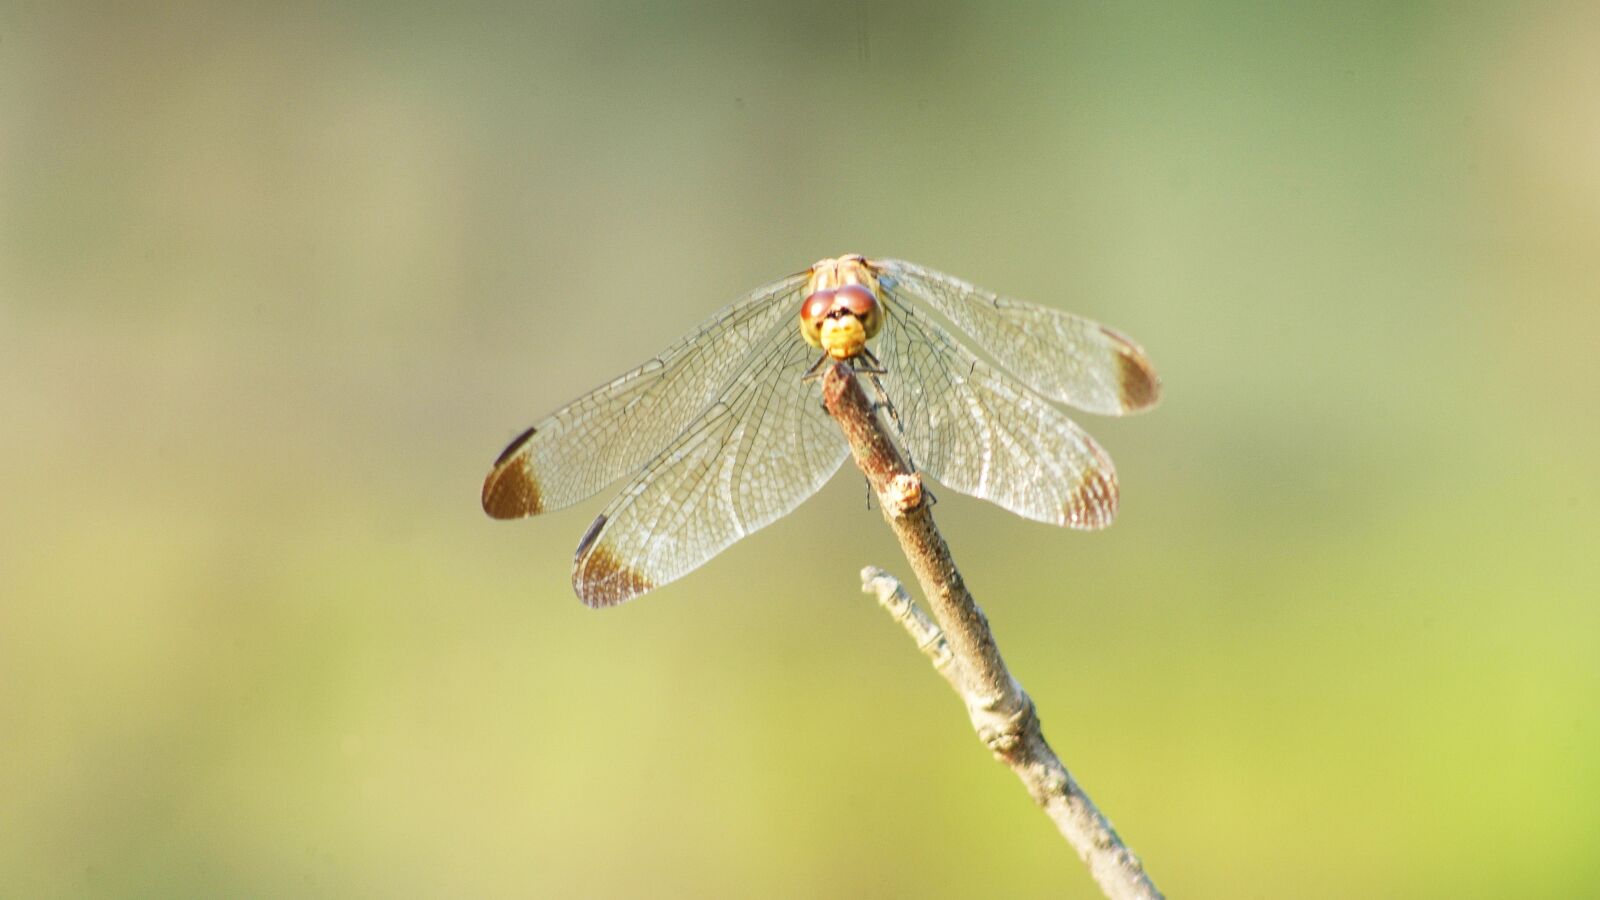 Fujifilm FinePix S3 Pro sample photo. Dragonfly, red dragonfly, autumn photography